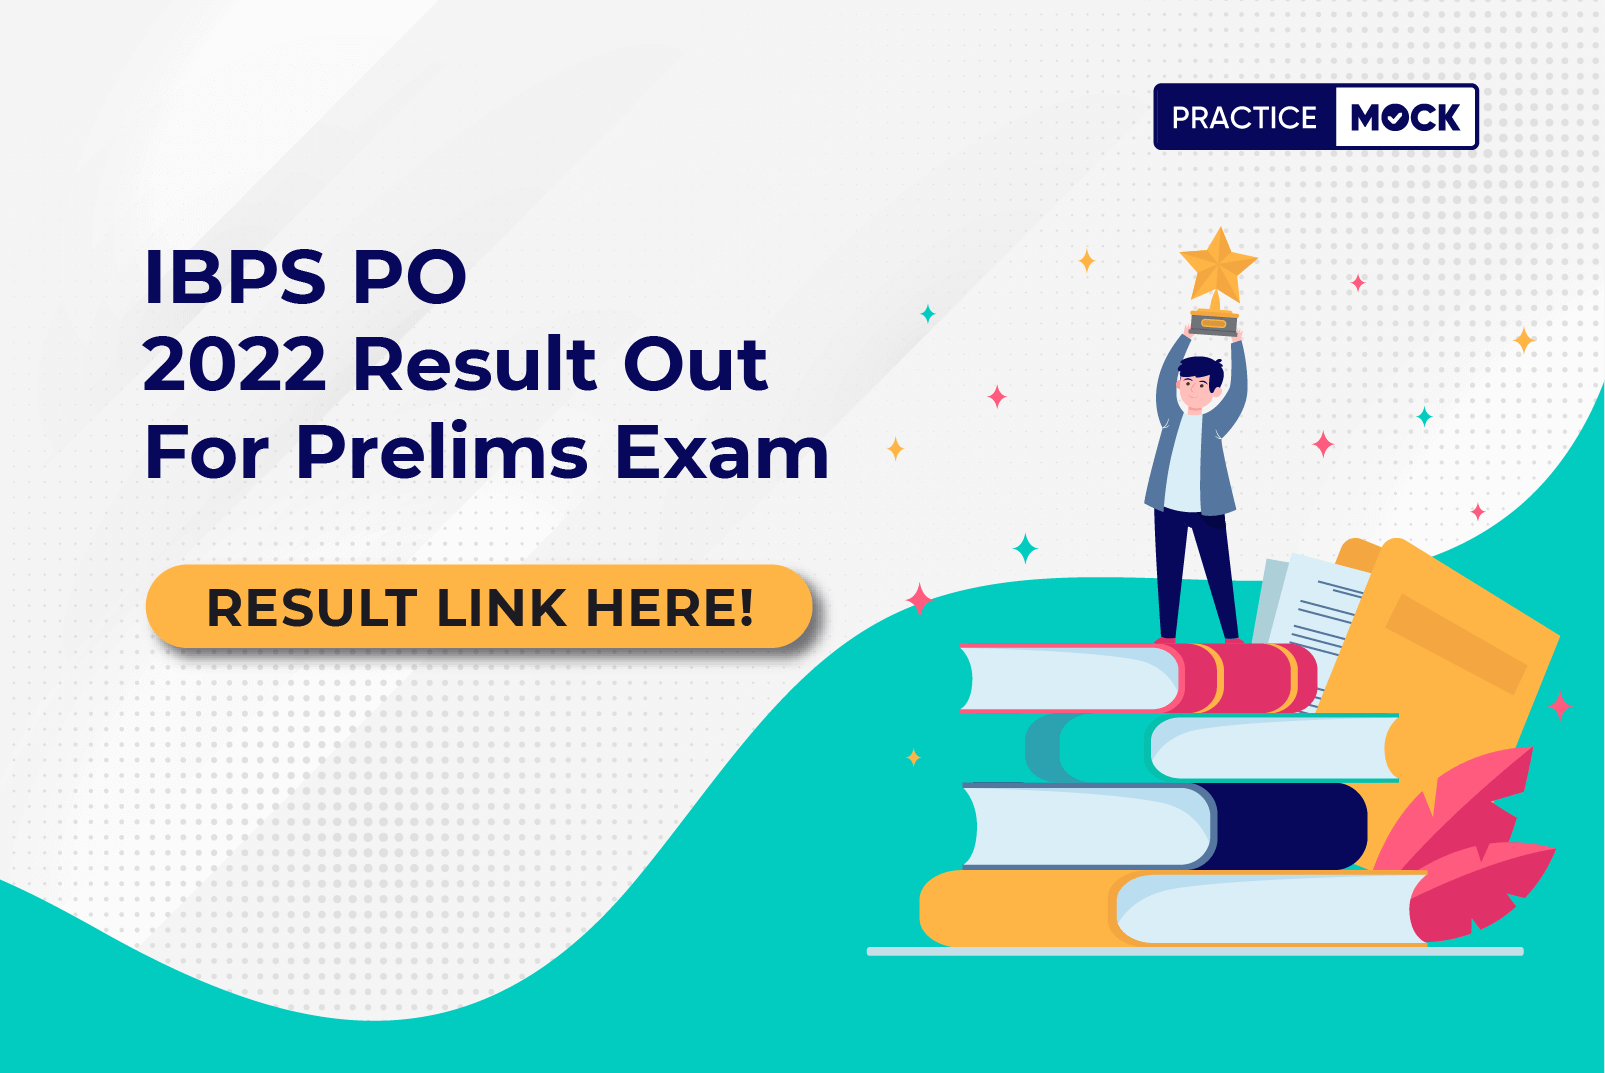 IBPS PO 2022 Result Out 2022 For Prelims Exam-Result Link Here!